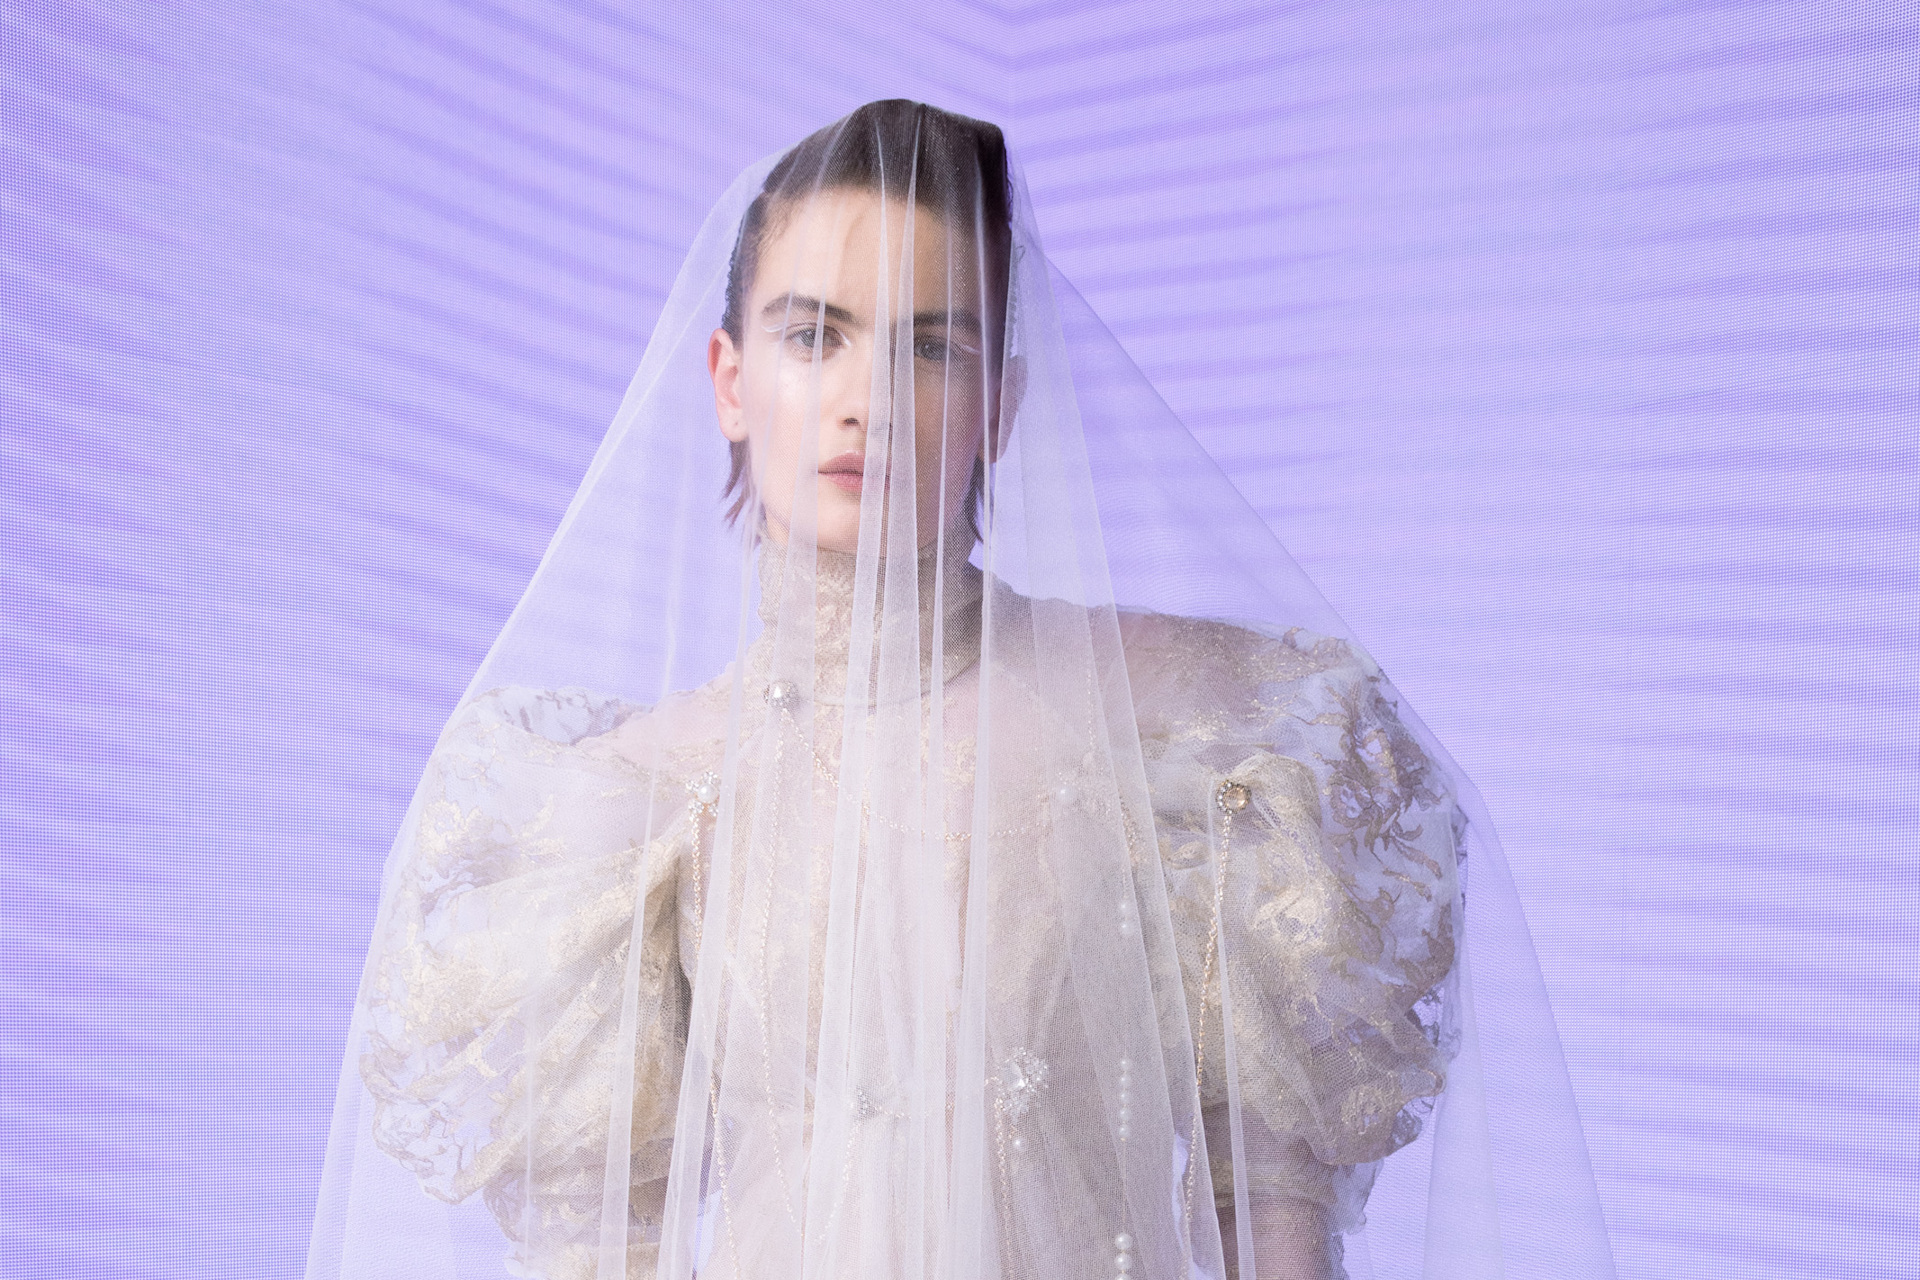 Woman in wedding dress and veil in front of purple background